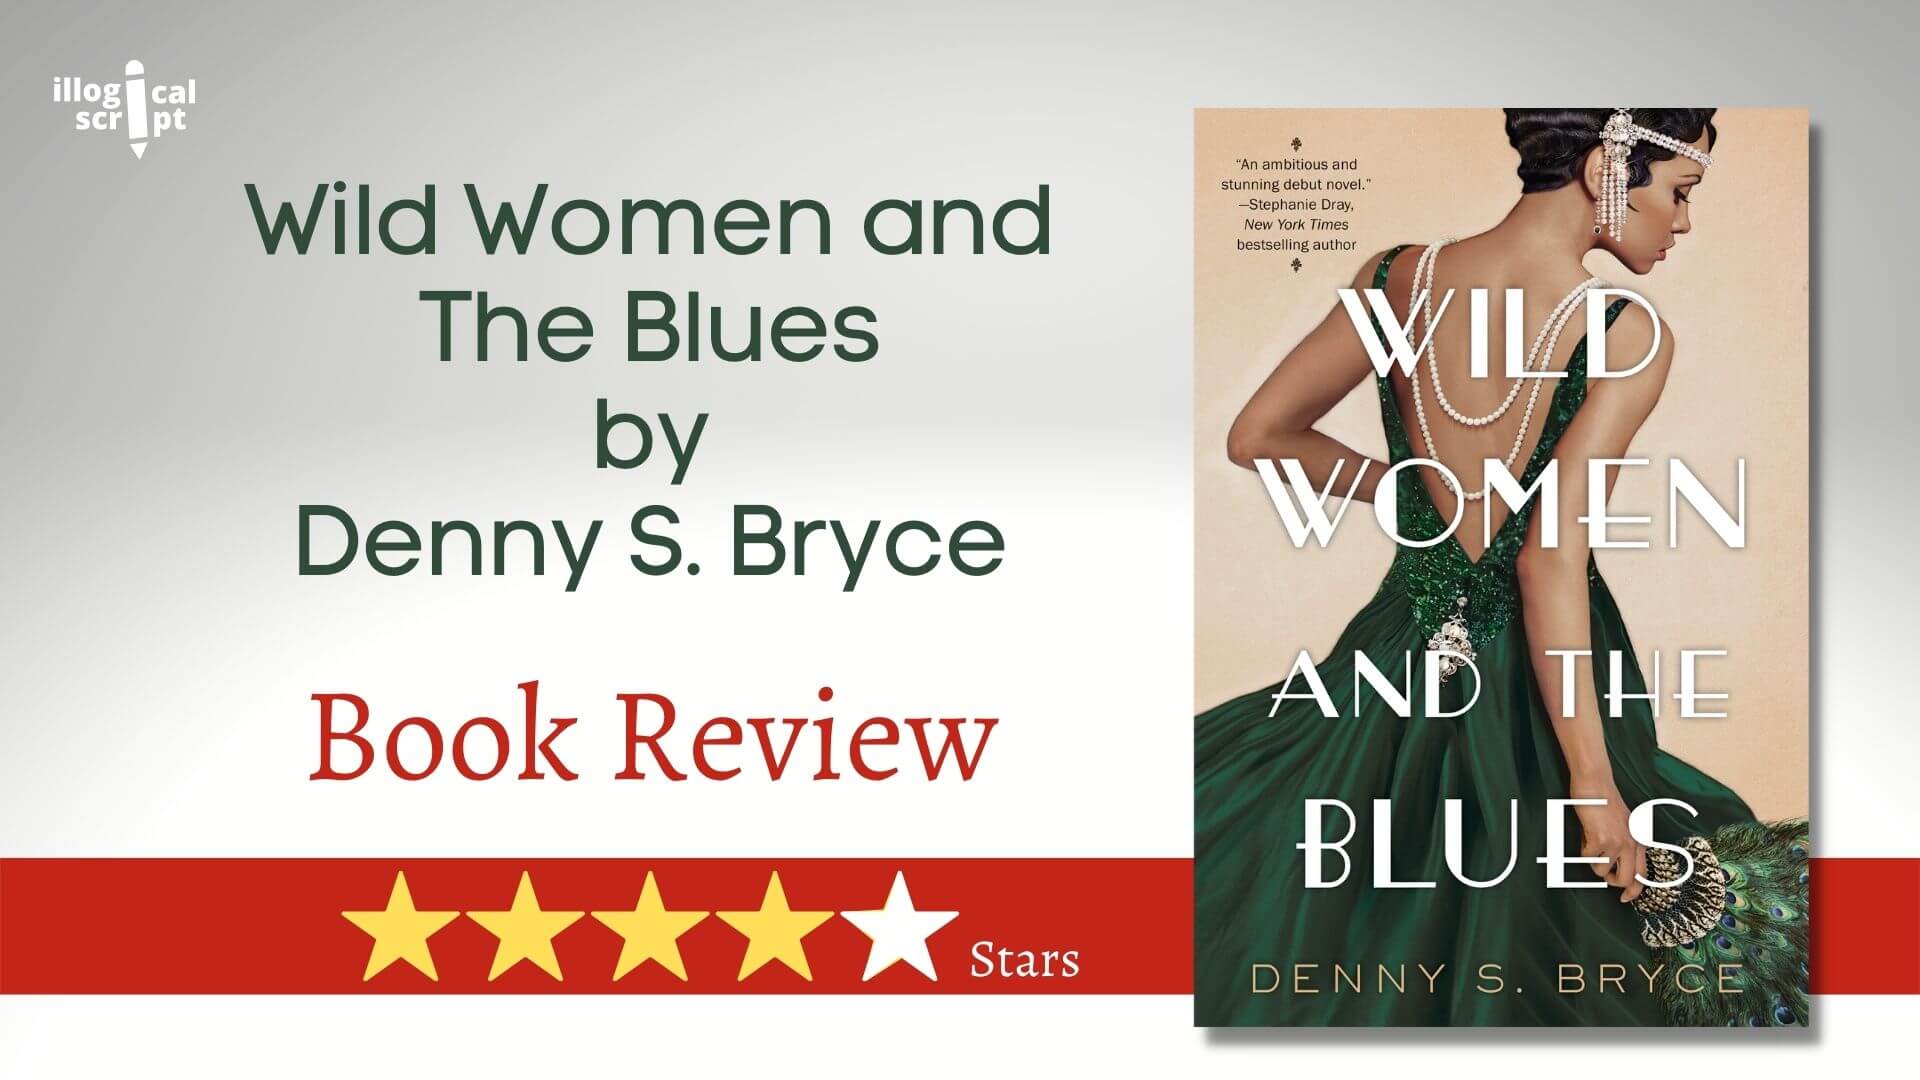 Book Review: Wild Women and The Blues by Denny S. Bryce